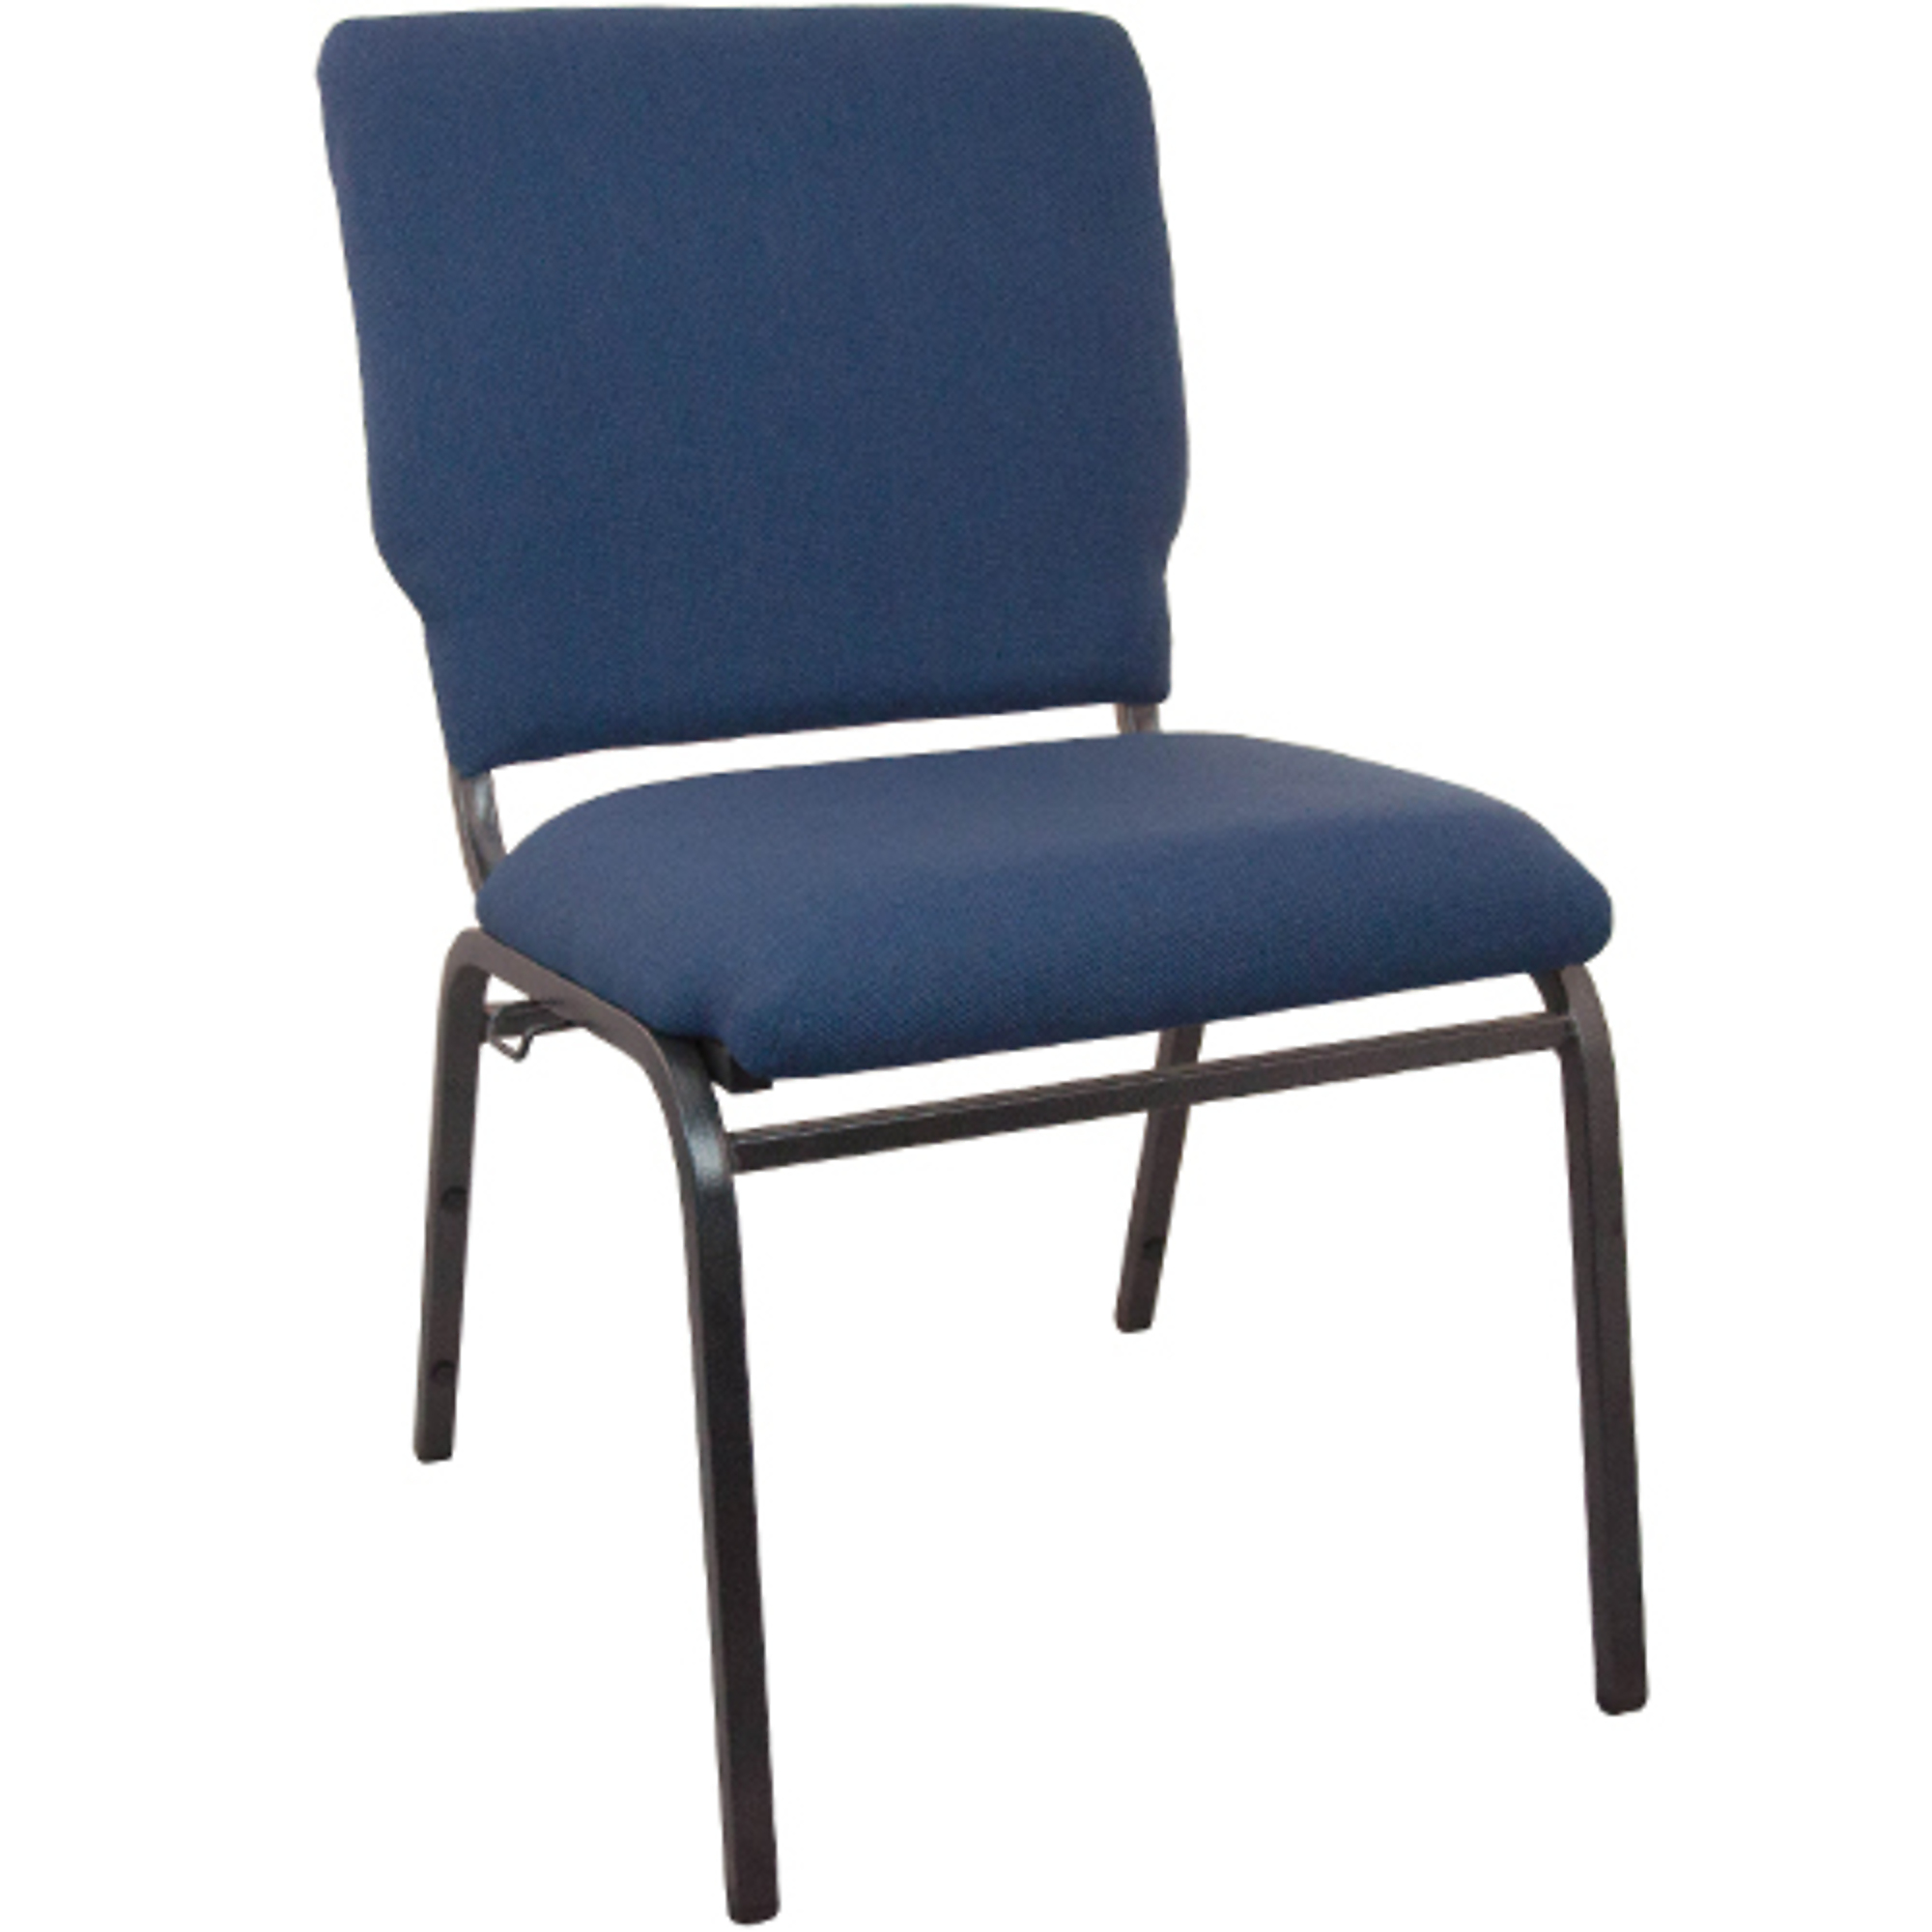 Flash Furniture, Navy Multipurpose Church Chairs - 18.5Inch Wide, Primary Color Blue, Included (qty.) 1, Model SEPCHT185101